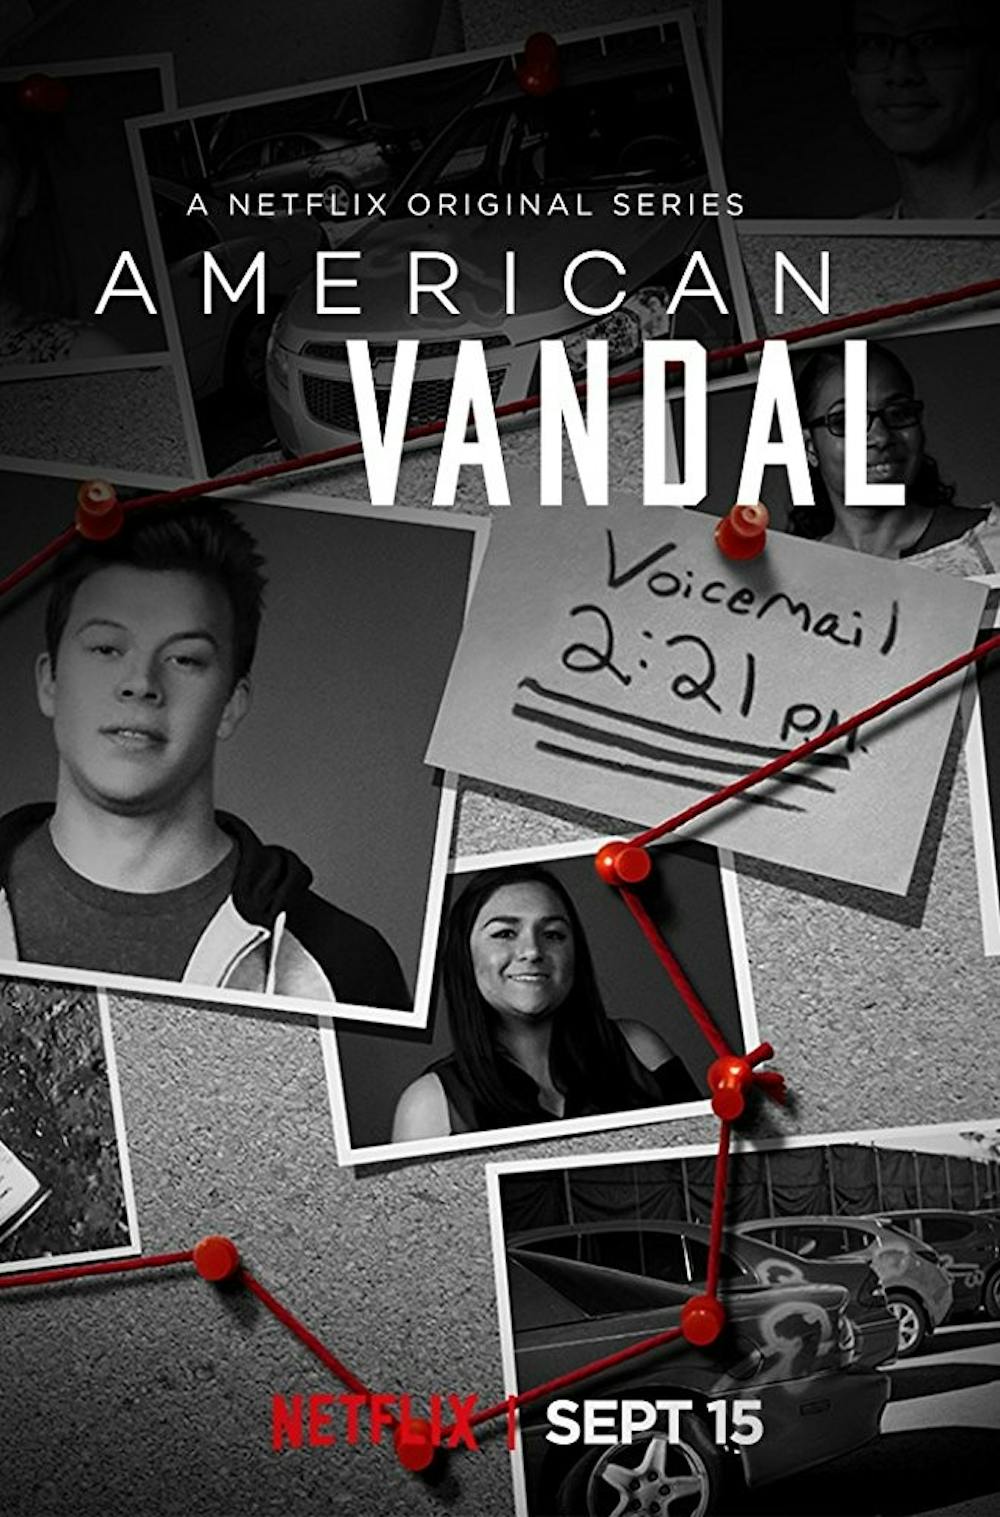 <p>"American Vandal" attacks modern teenage life with a meticulous eye for detail.</p>